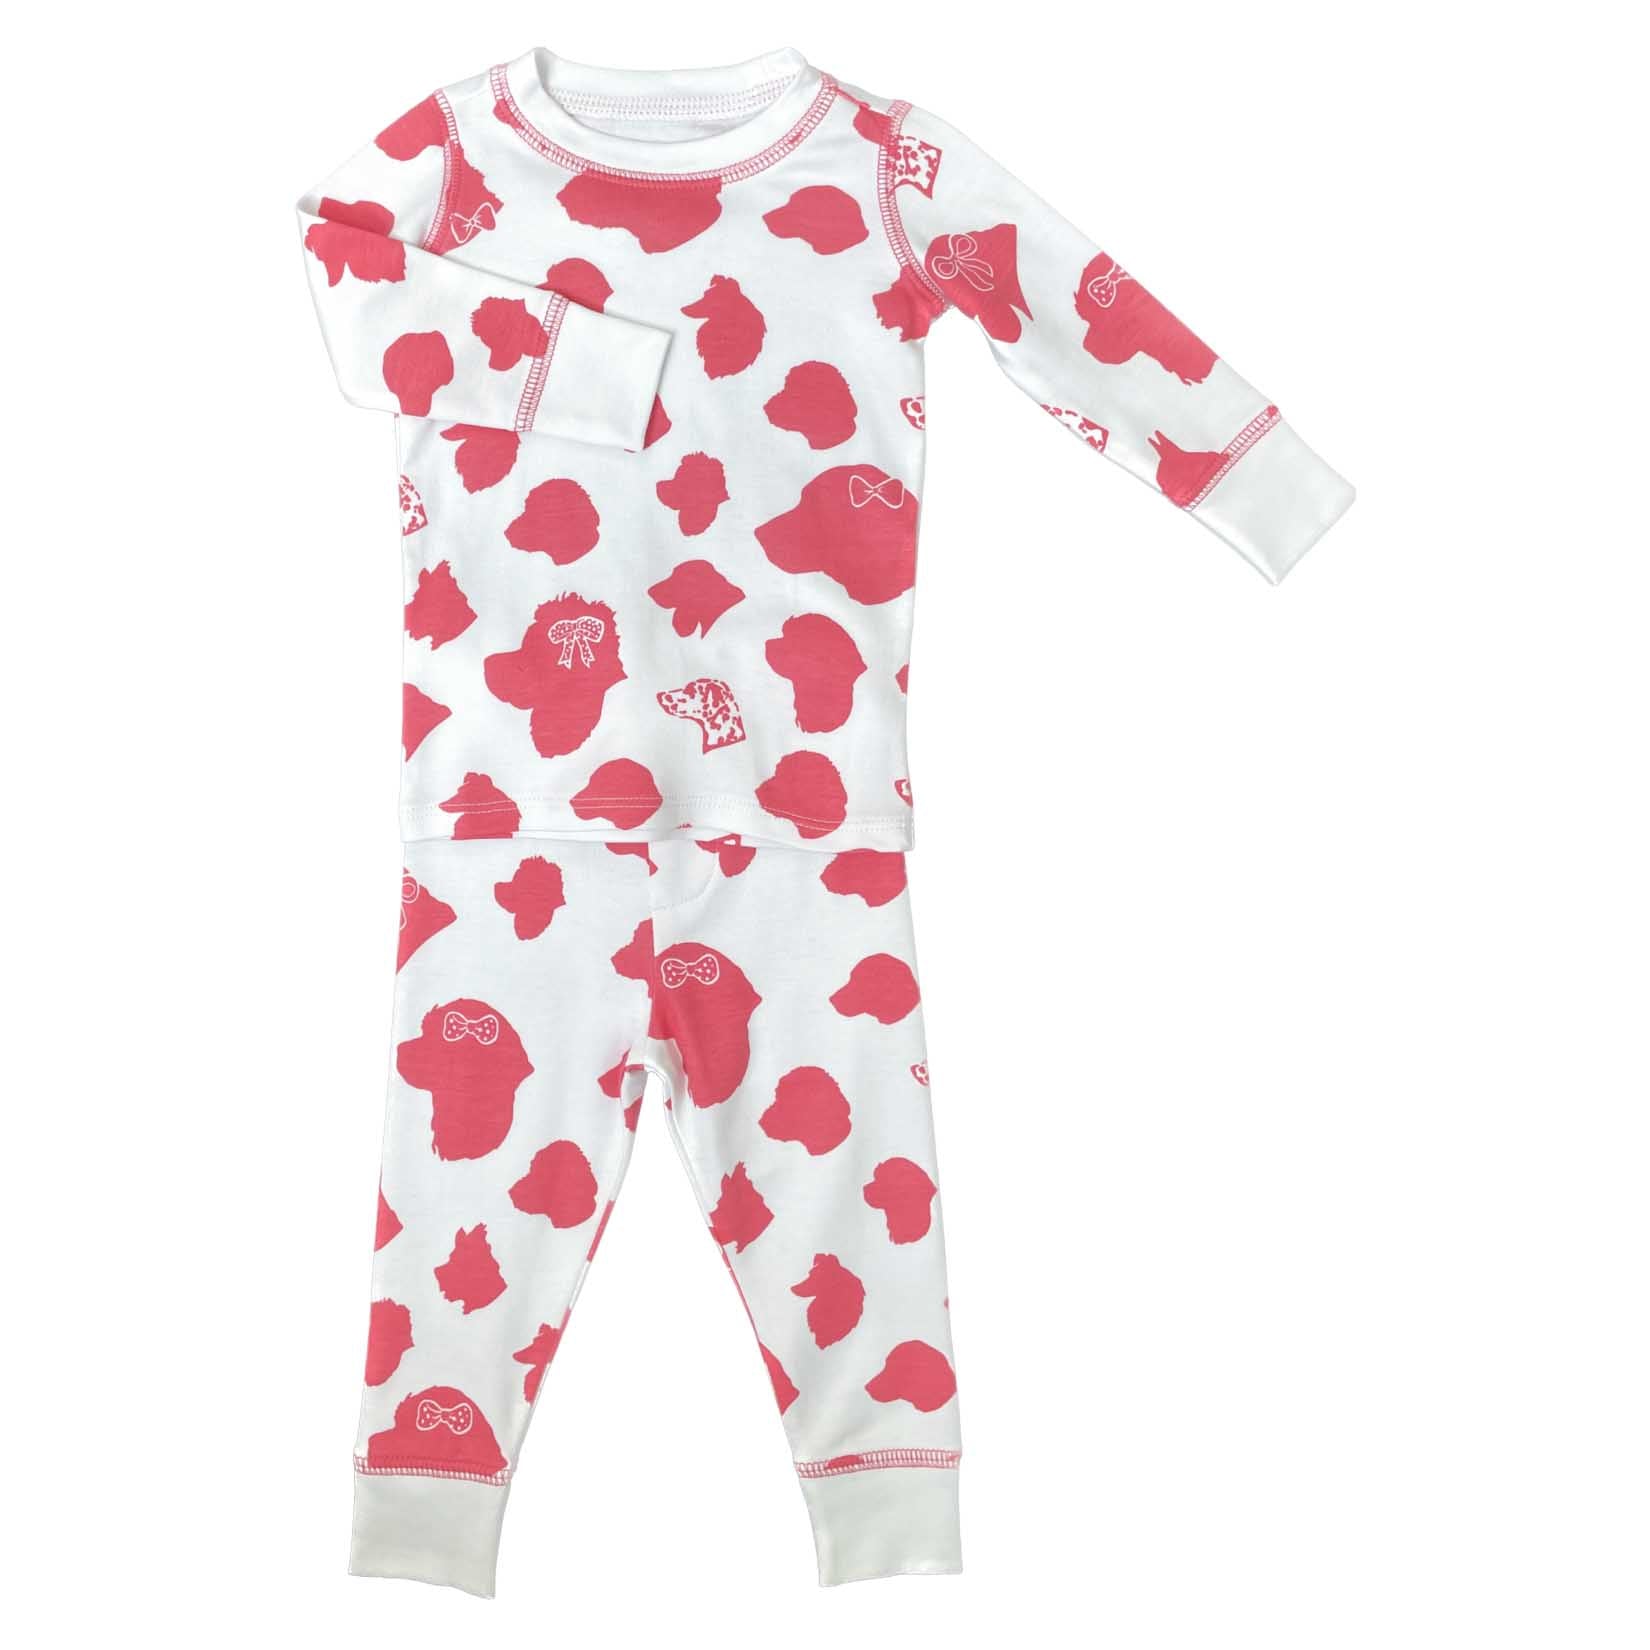 front set of pink dog pajamas made of soft pima cotton designed by Heyward House